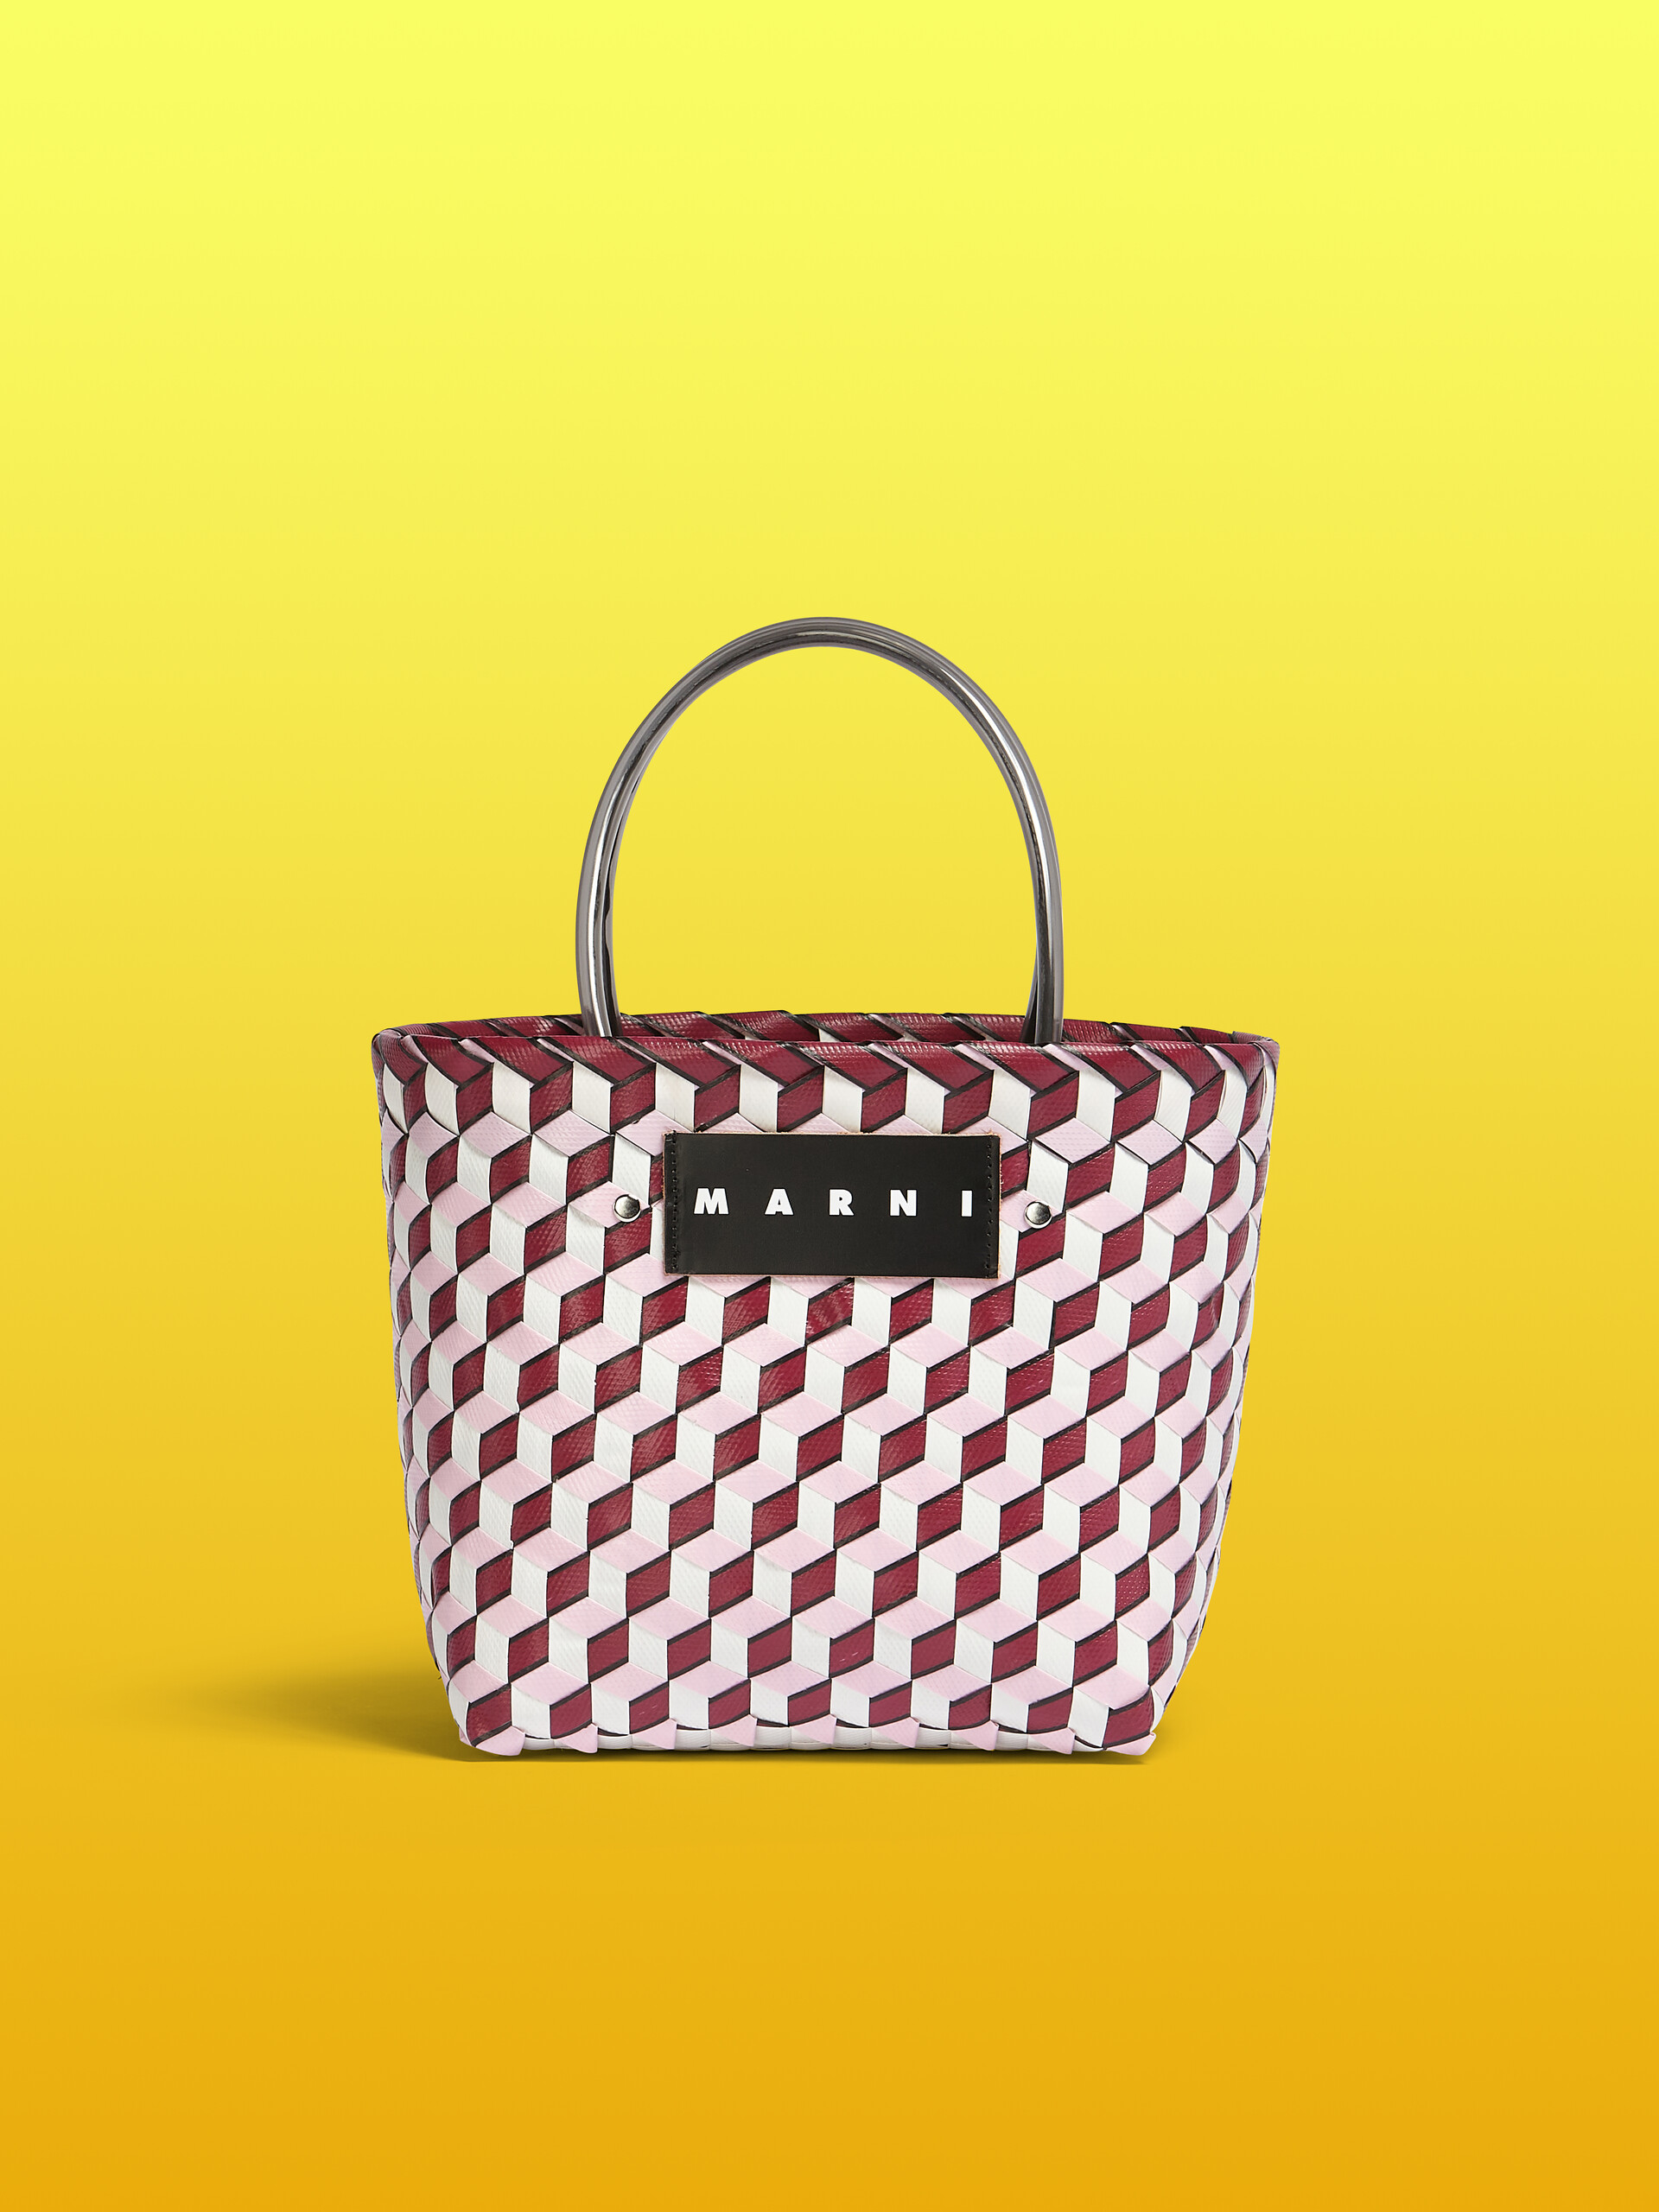 MARNI MARKET 3D BAG in burgundy cube woven material